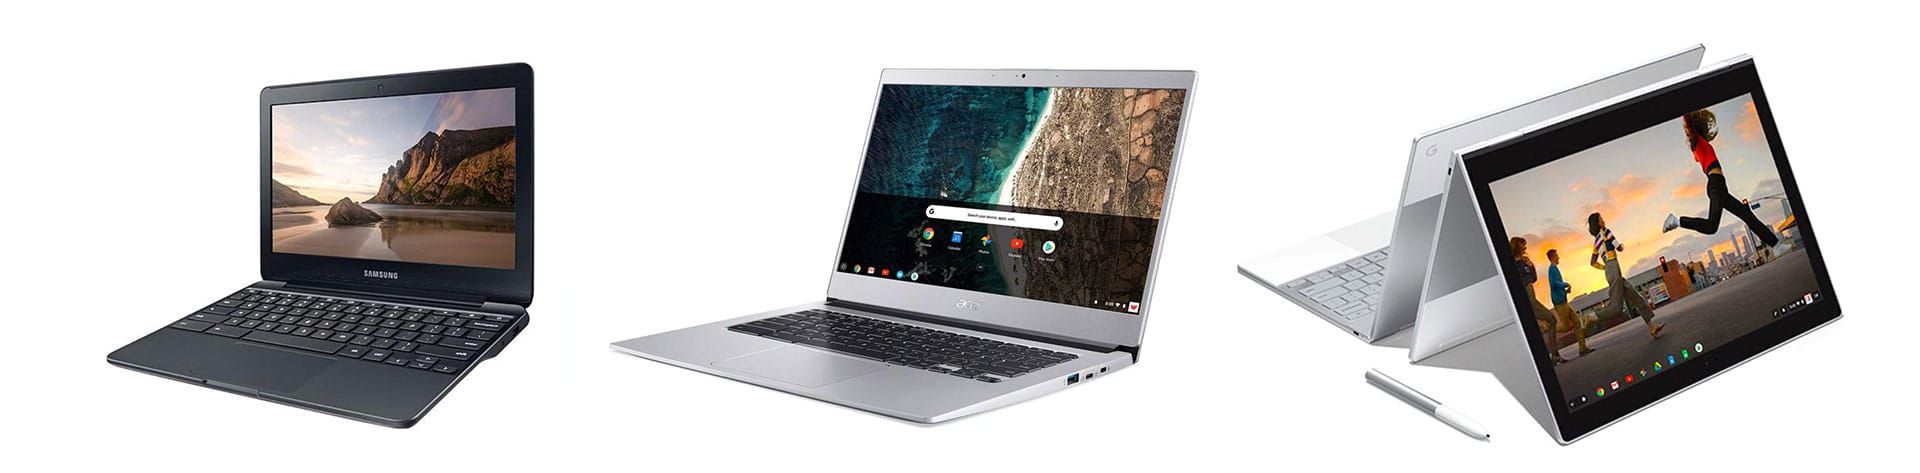 Some of the best 11-inch Chromebook laptops available in stores